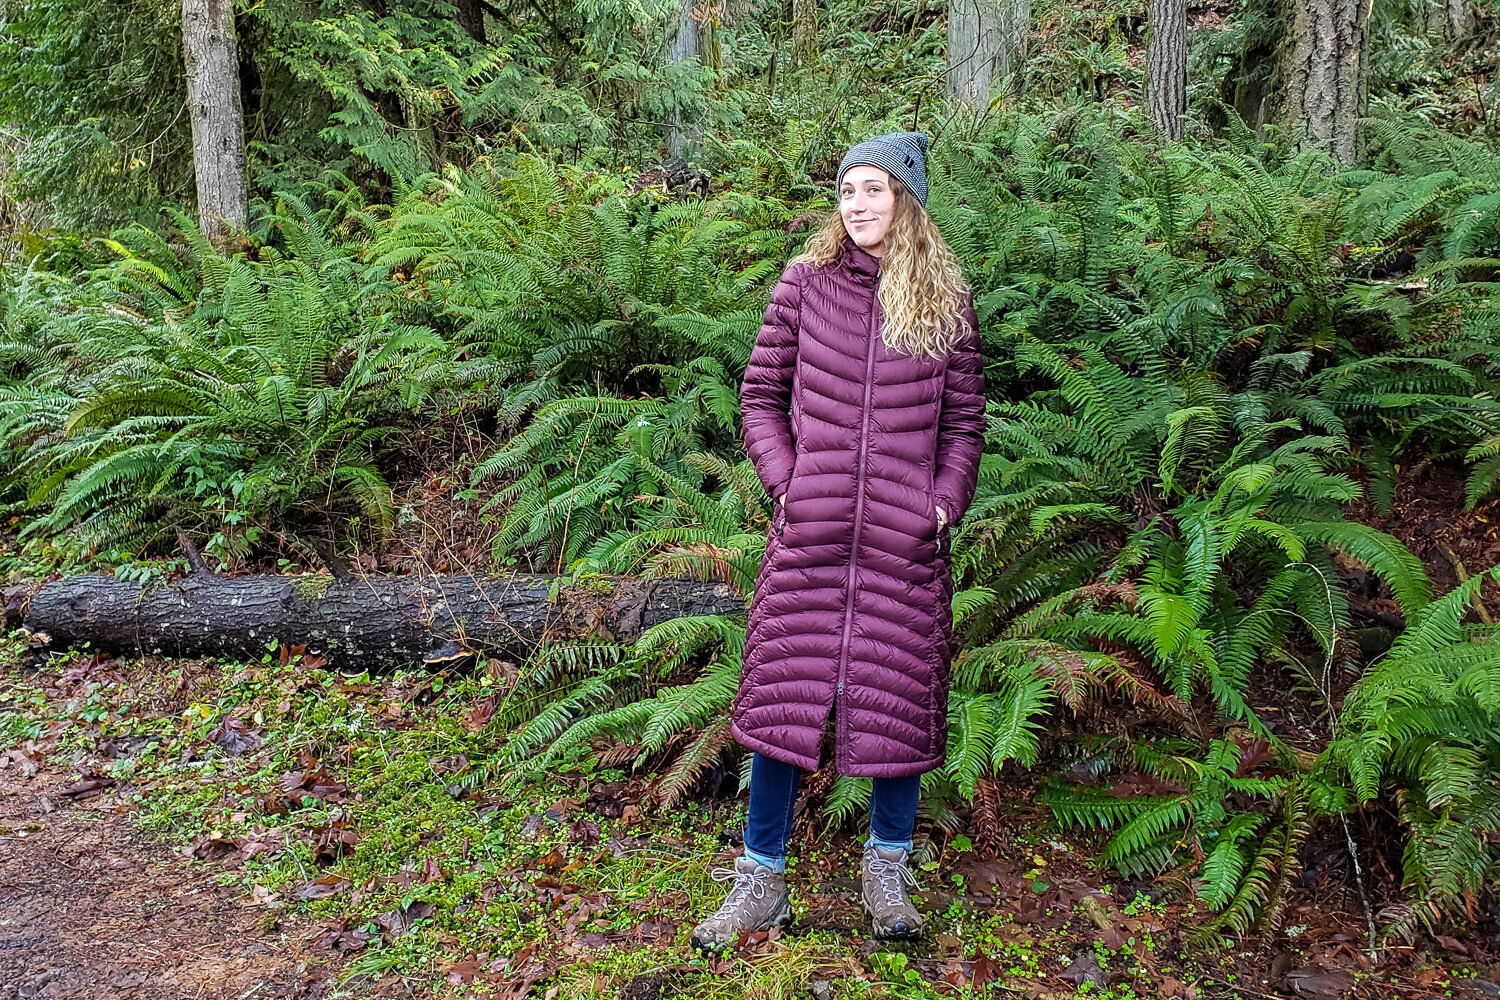 The LL Bean Long Ultralight 850 Down Coat provides lots of warmth & coverage while being super lightweight & compressible.